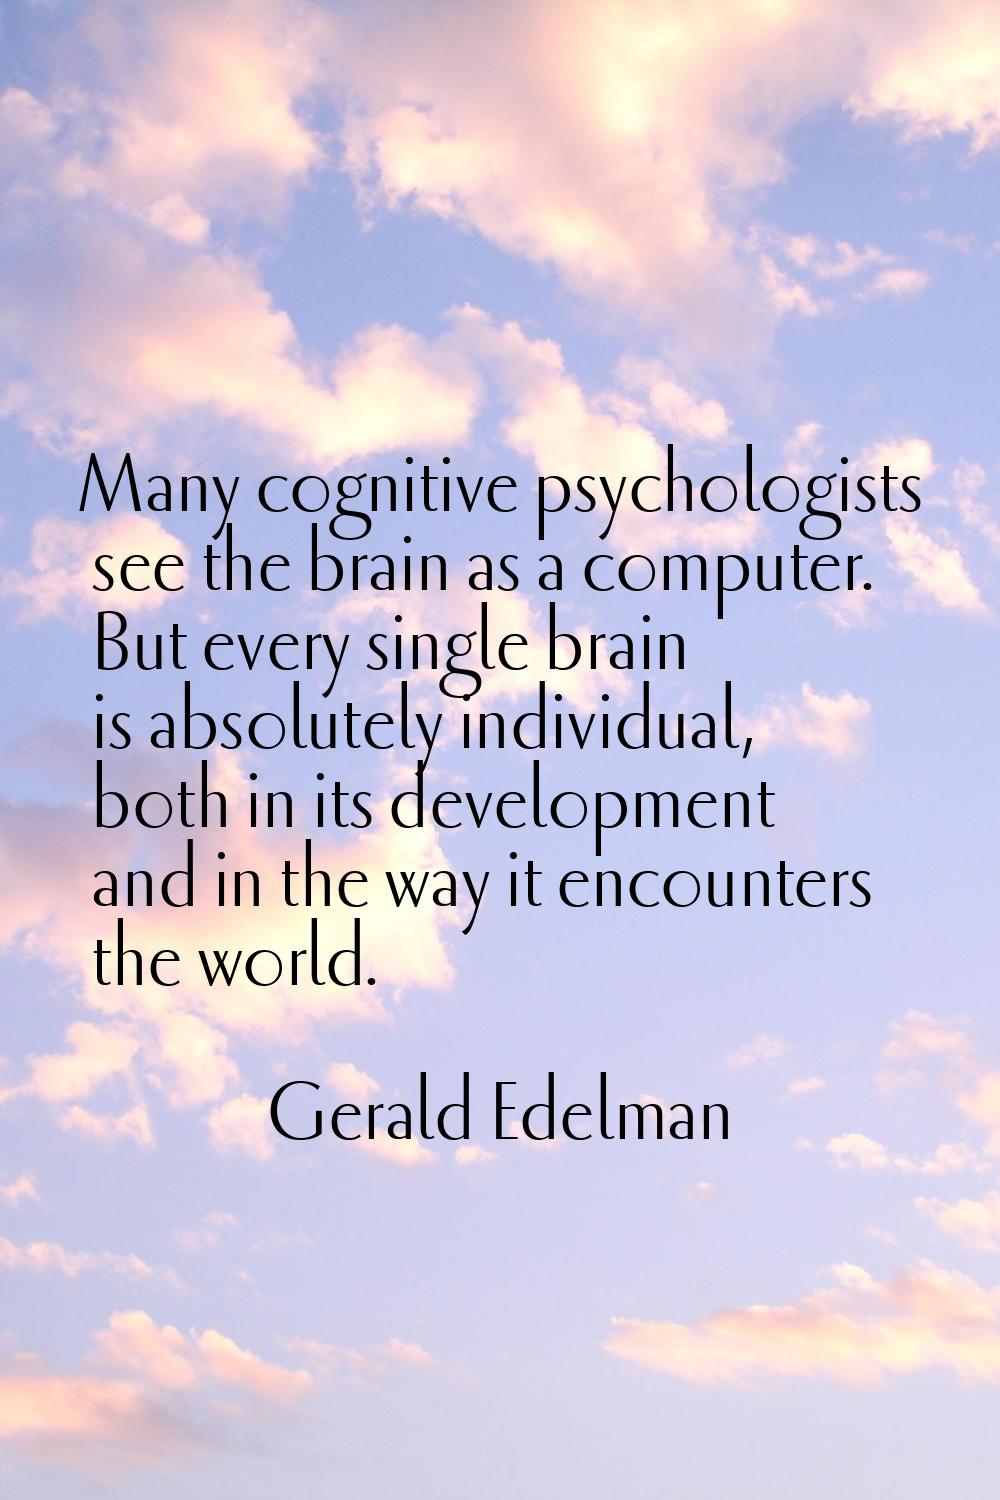 Many cognitive psychologists see the brain as a computer. But every single brain is absolutely indi